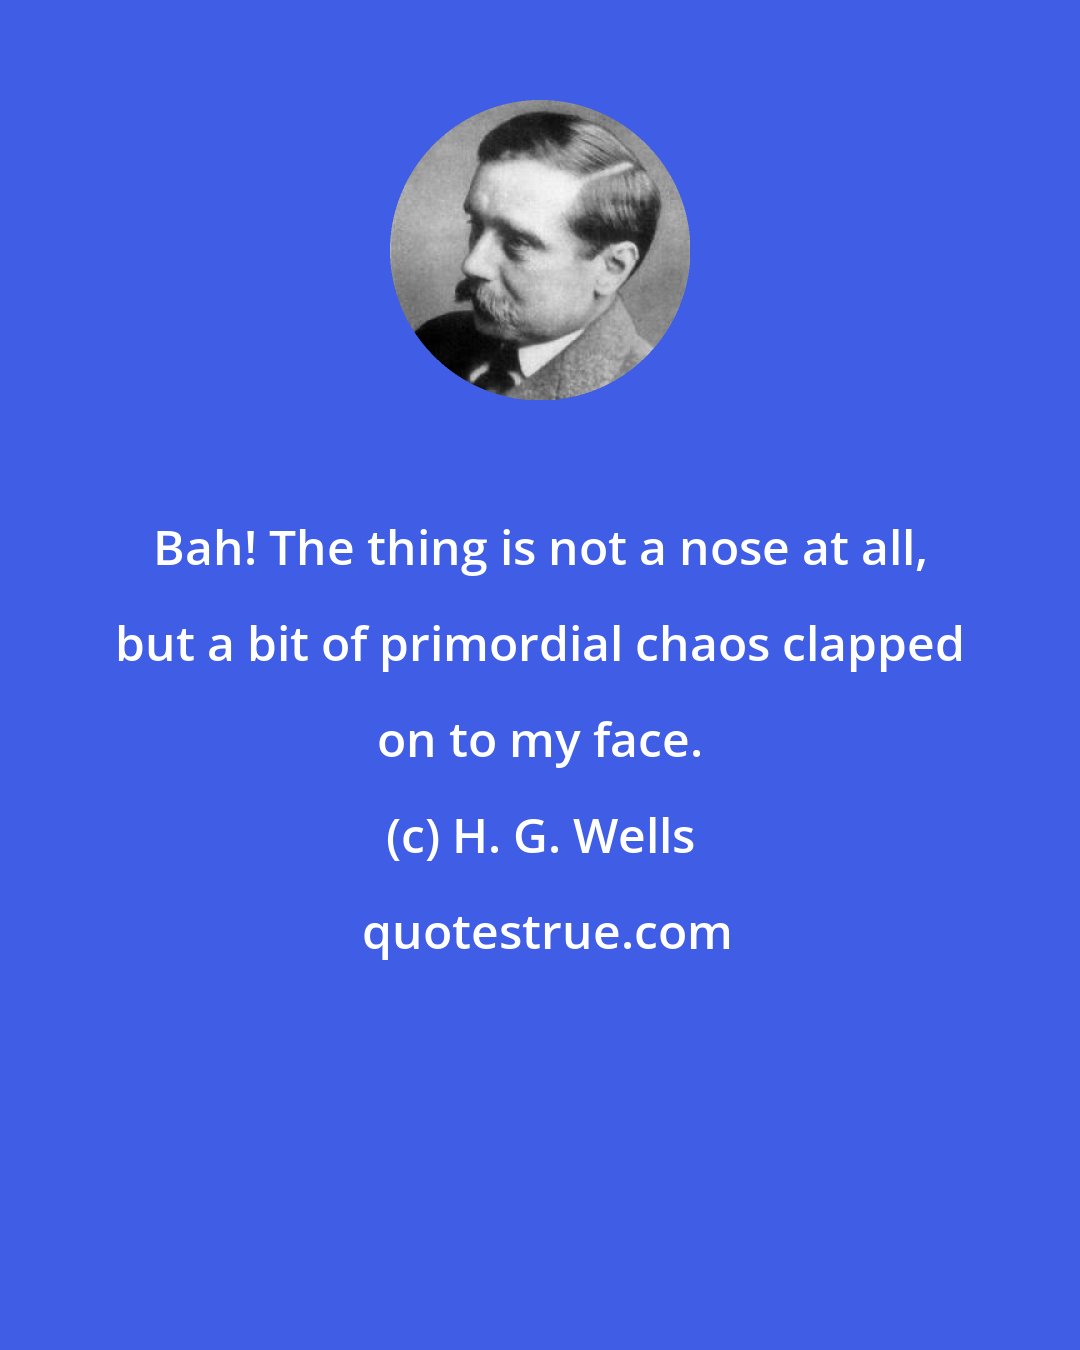 H. G. Wells: Bah! The thing is not a nose at all, but a bit of primordial chaos clapped on to my face.